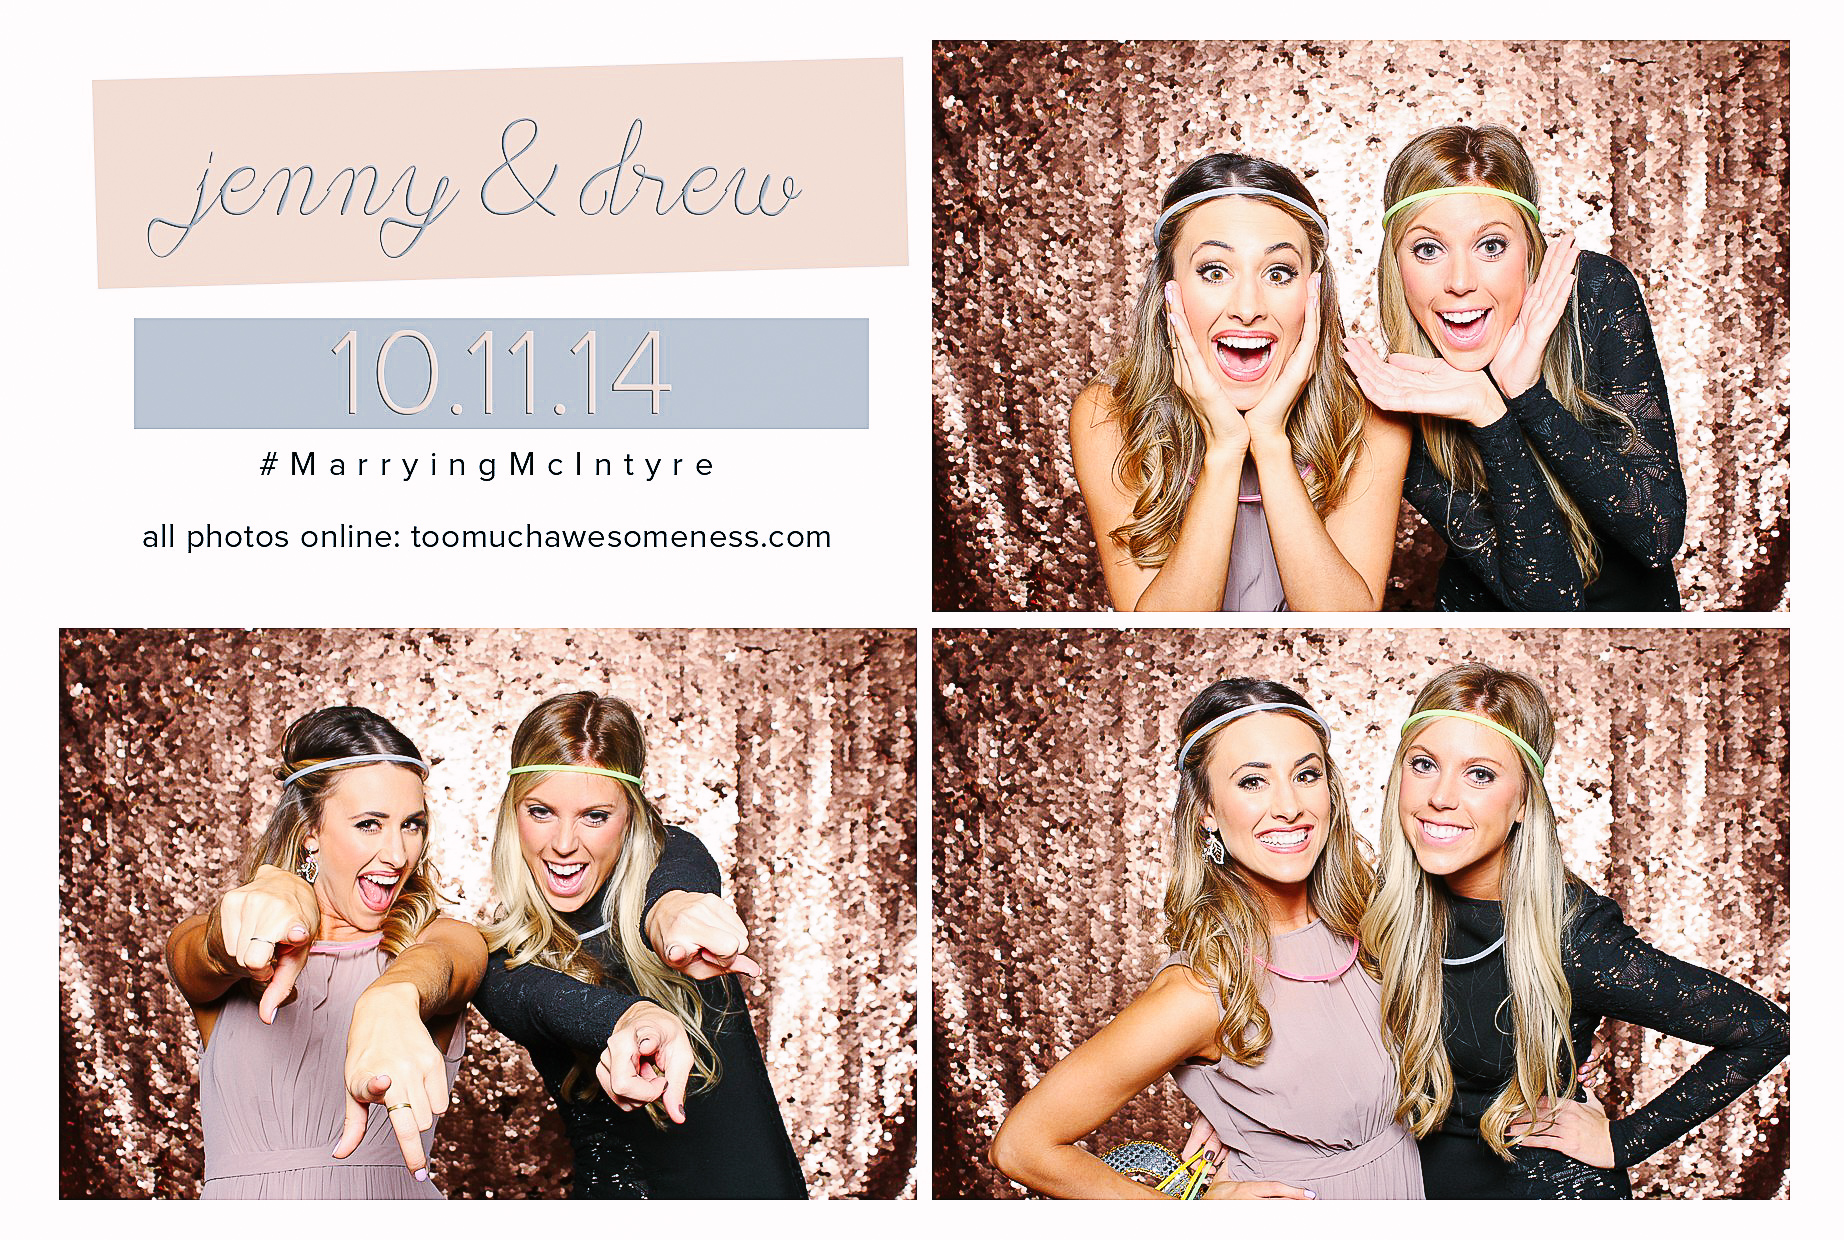 00377-Photo Booth at The Westin Hotel Cleveland Jenny and Drew Wedding Photos-20141011.jpg